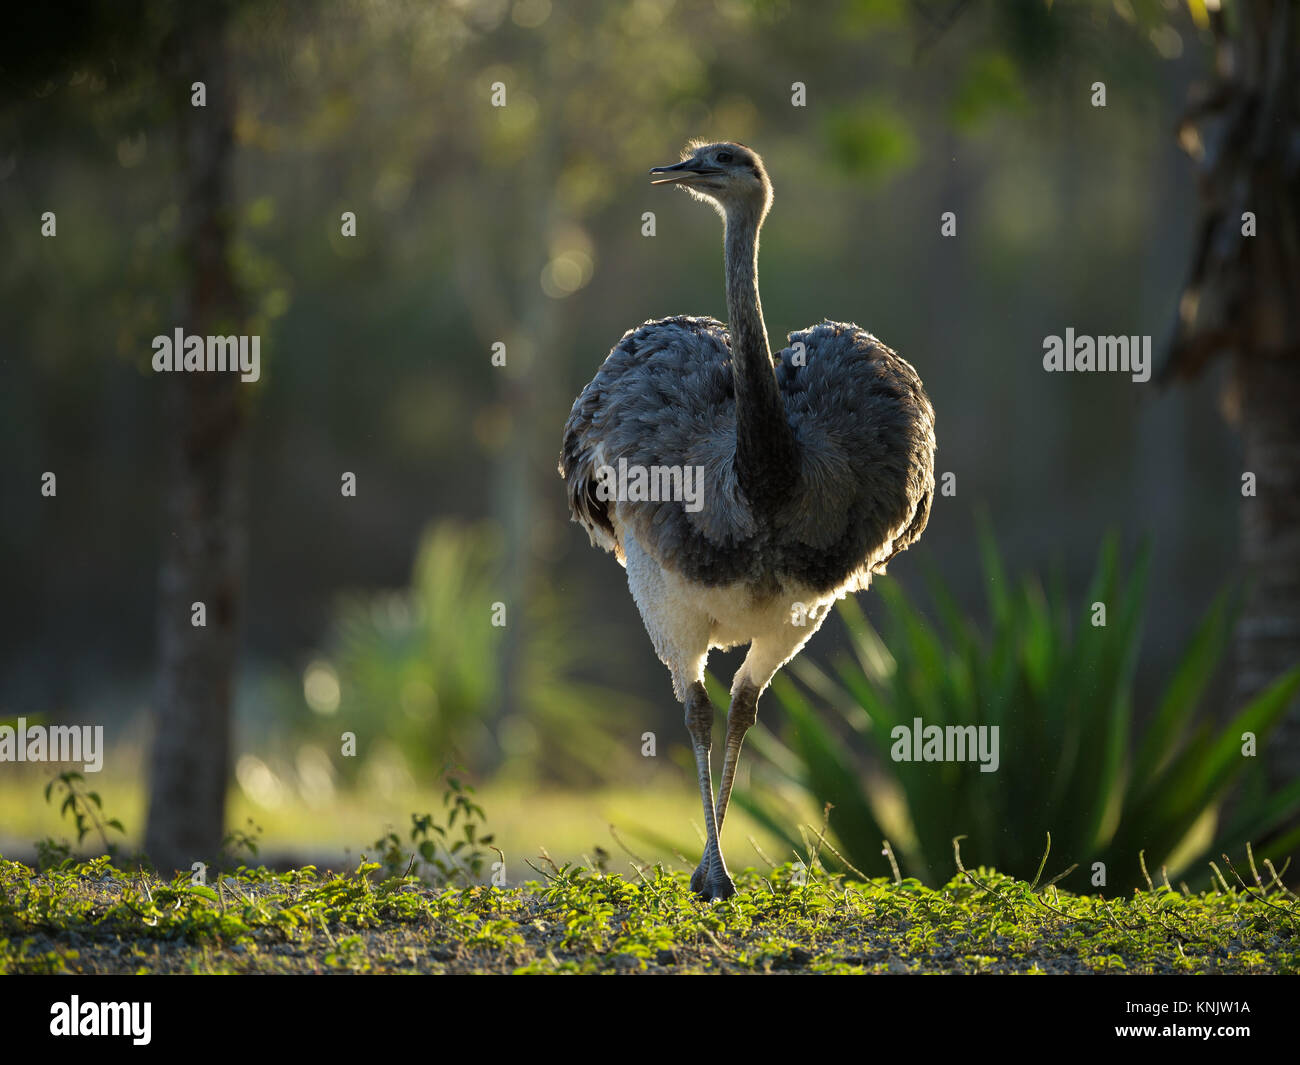 Miami, Forida, USA. 8th Dec, 2013. A rhea walks. The rheas are large ratites in the order Rheiformes, native to South America, related to the ostrich and emu. Credit: Laura Heald/ZUMA Wire/Alamy Live News Stock Photo